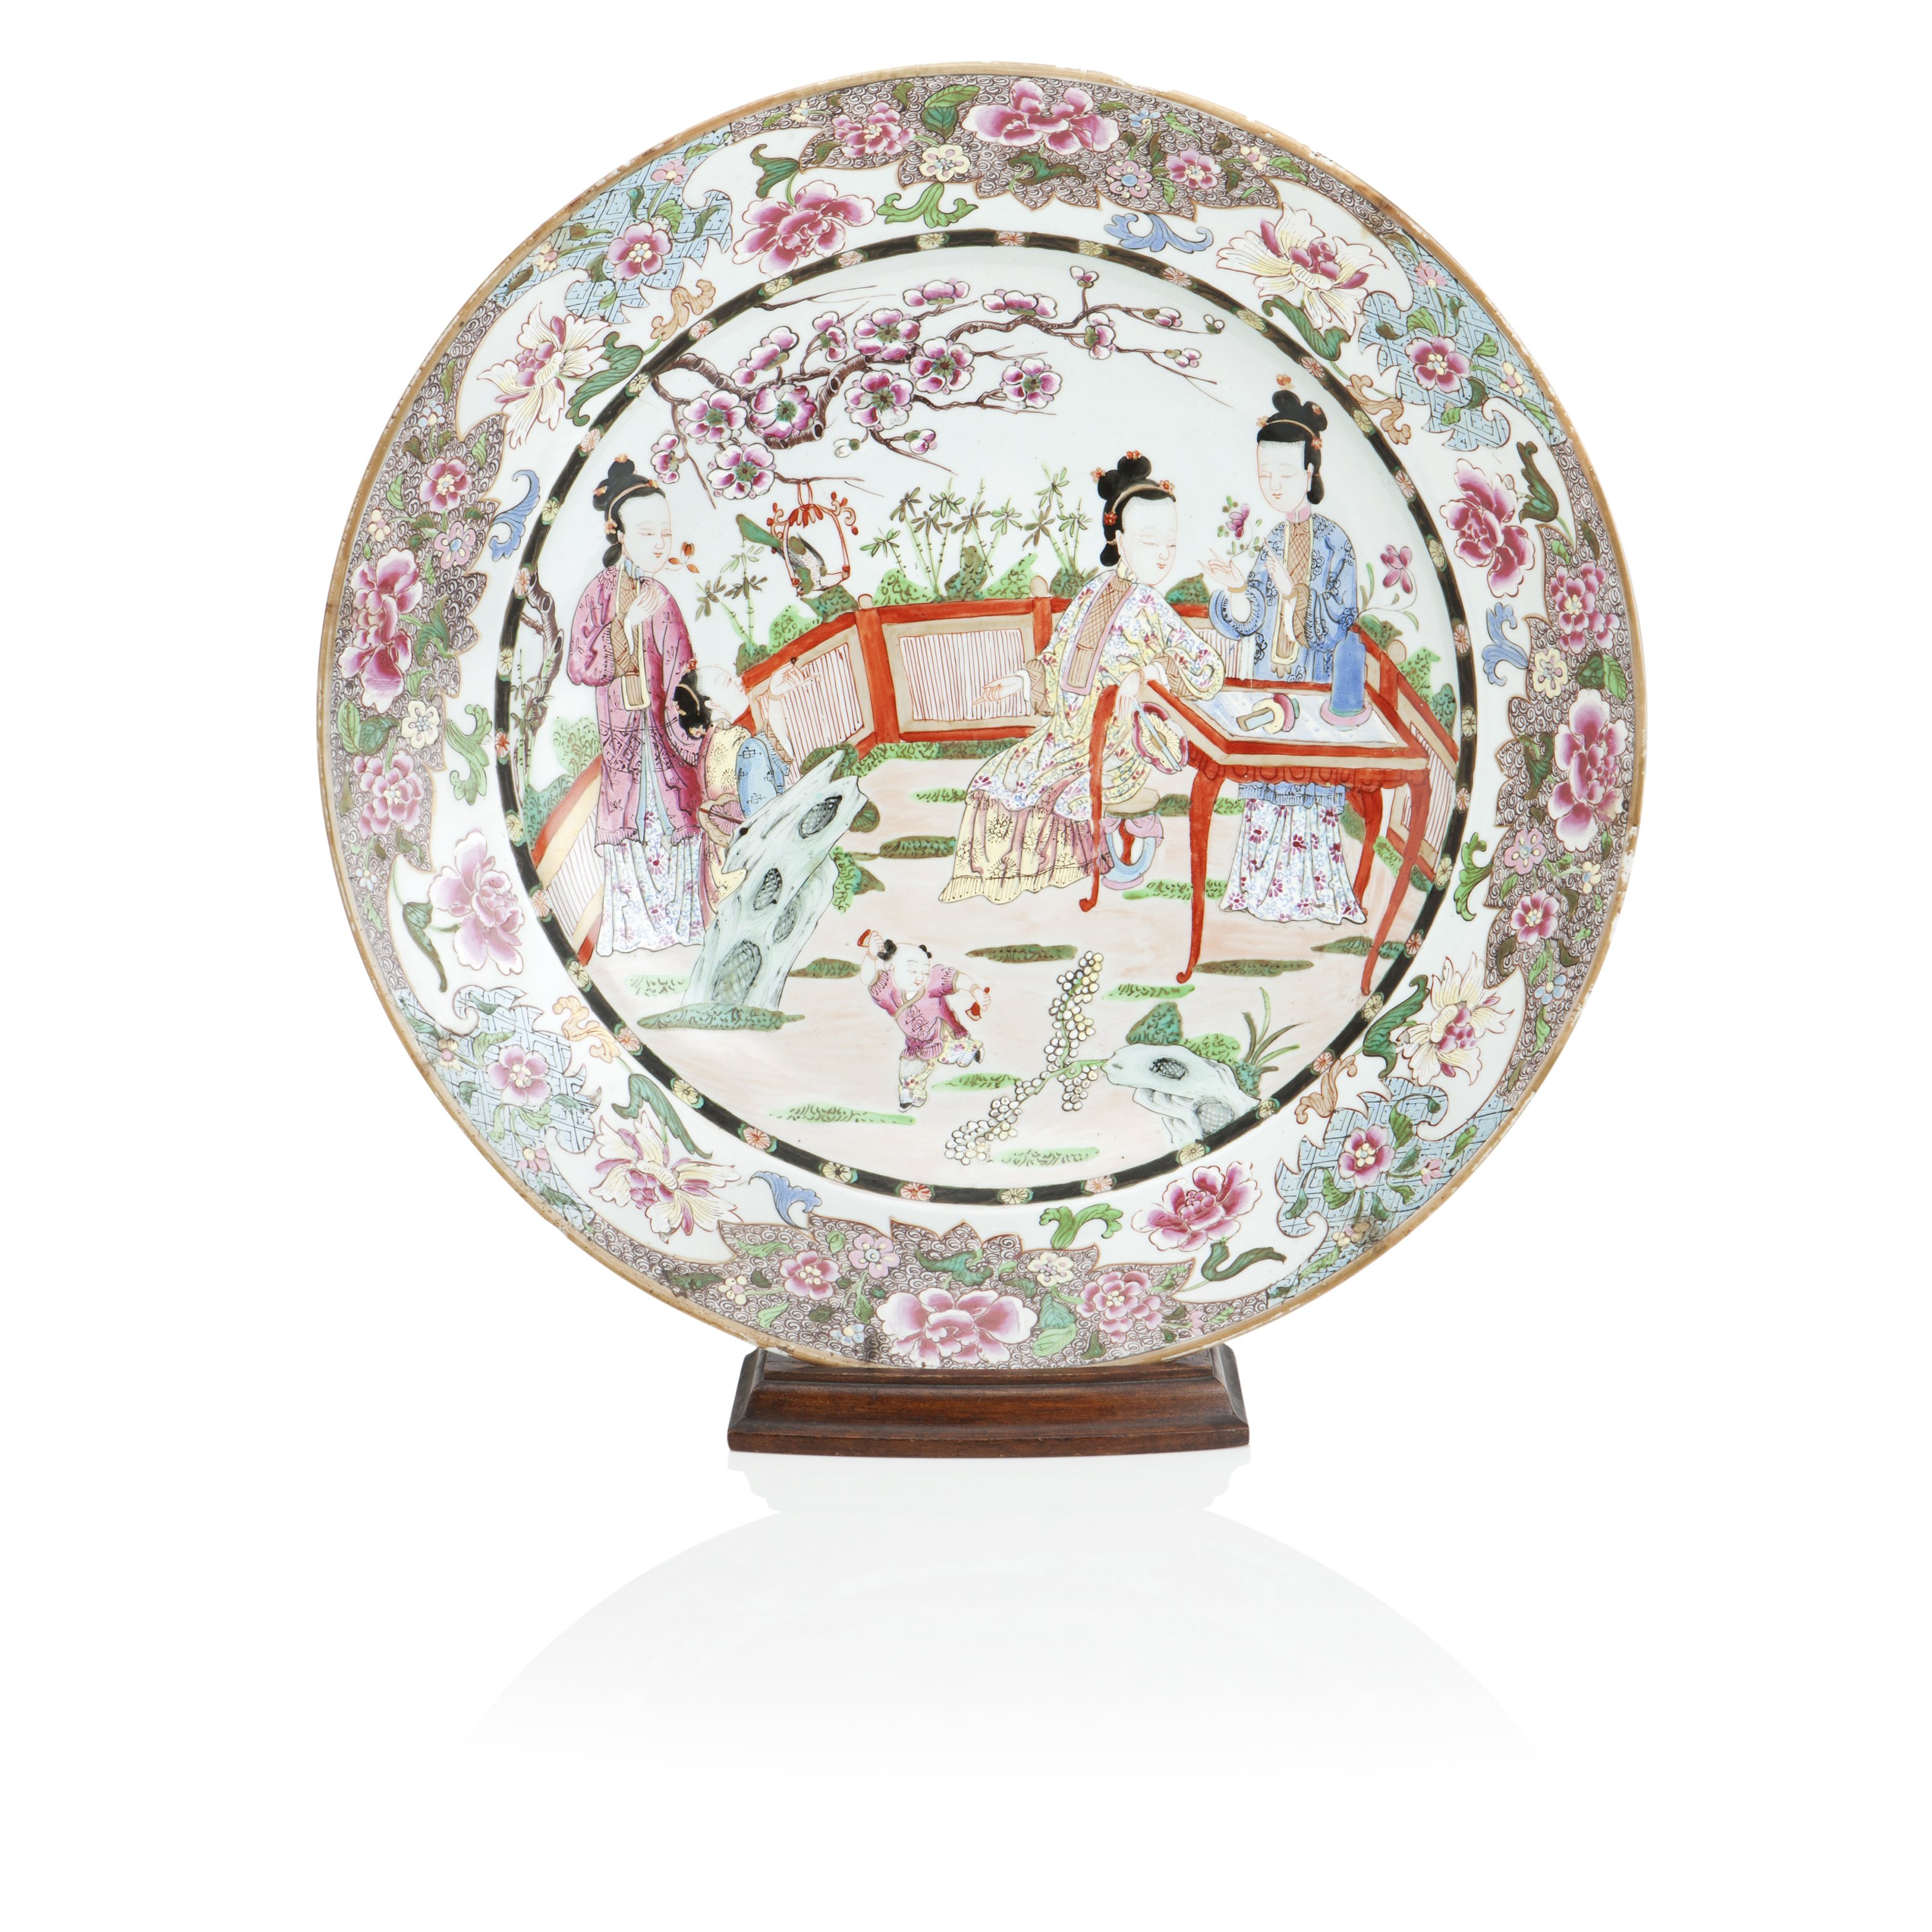 A CHINESE FAMILLE ROSE CHARGER 19th century